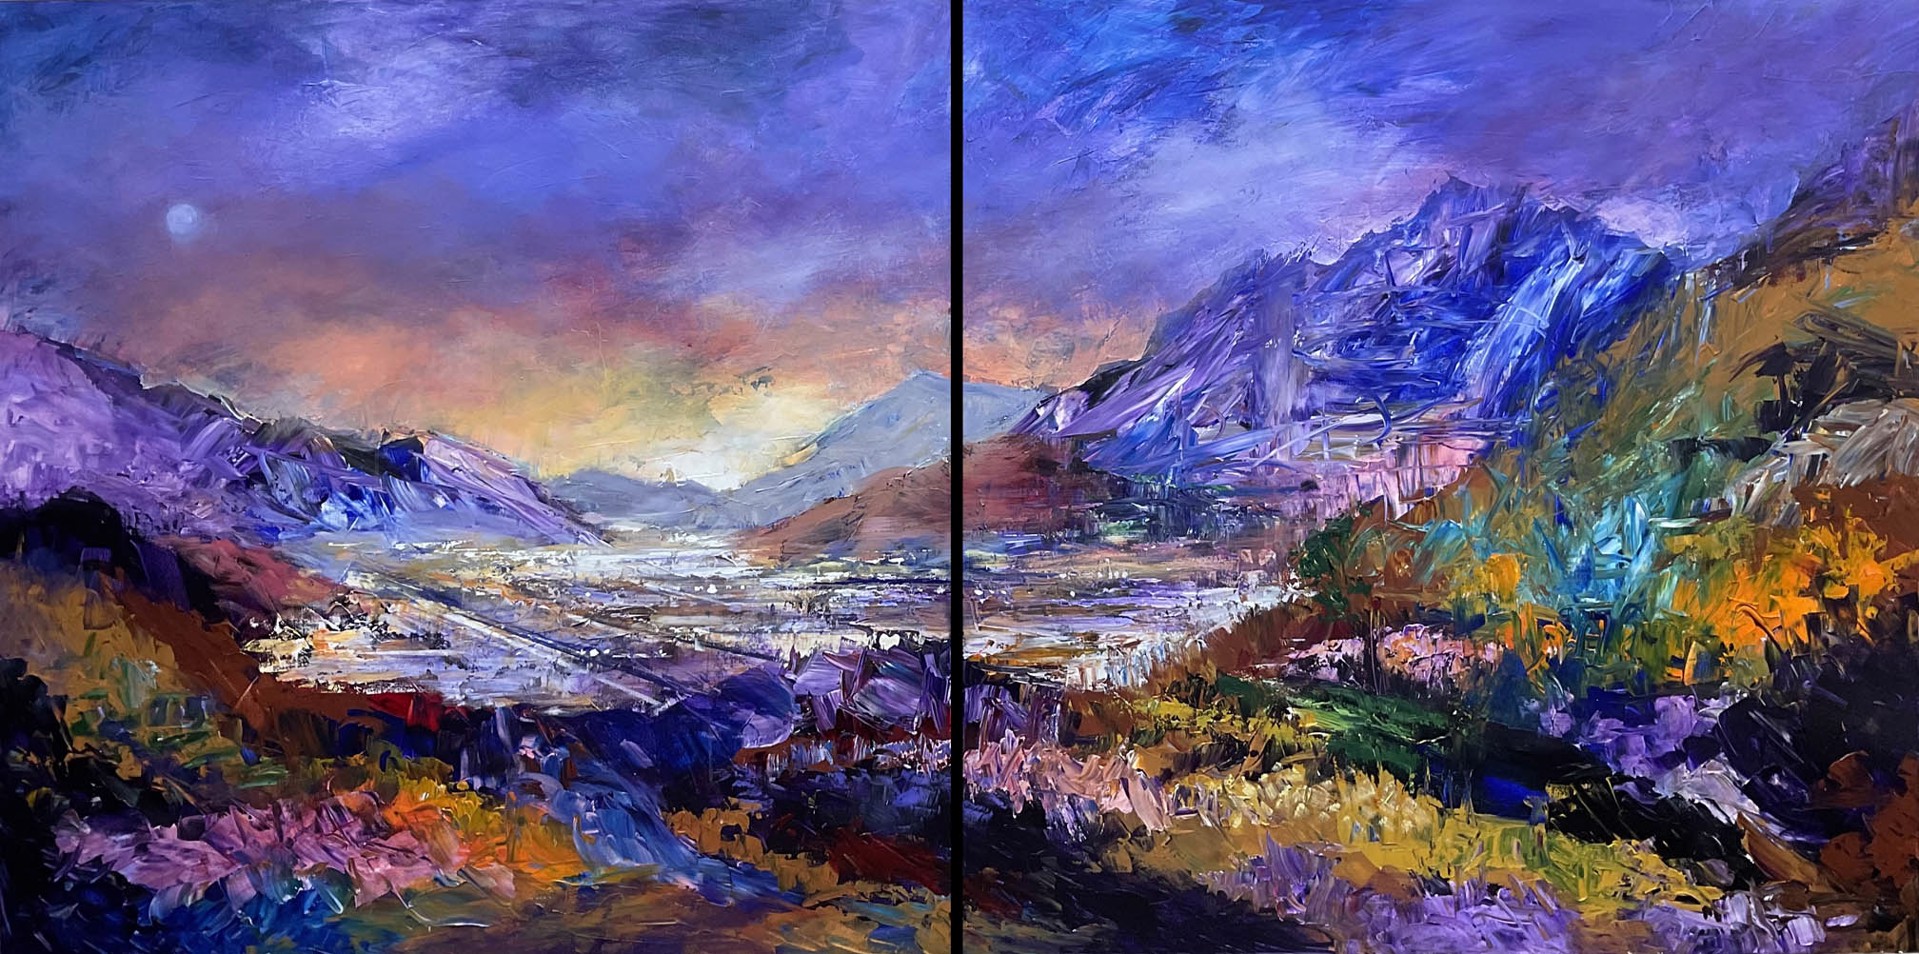 Moonrise (diptych painting) by Bruce MARION